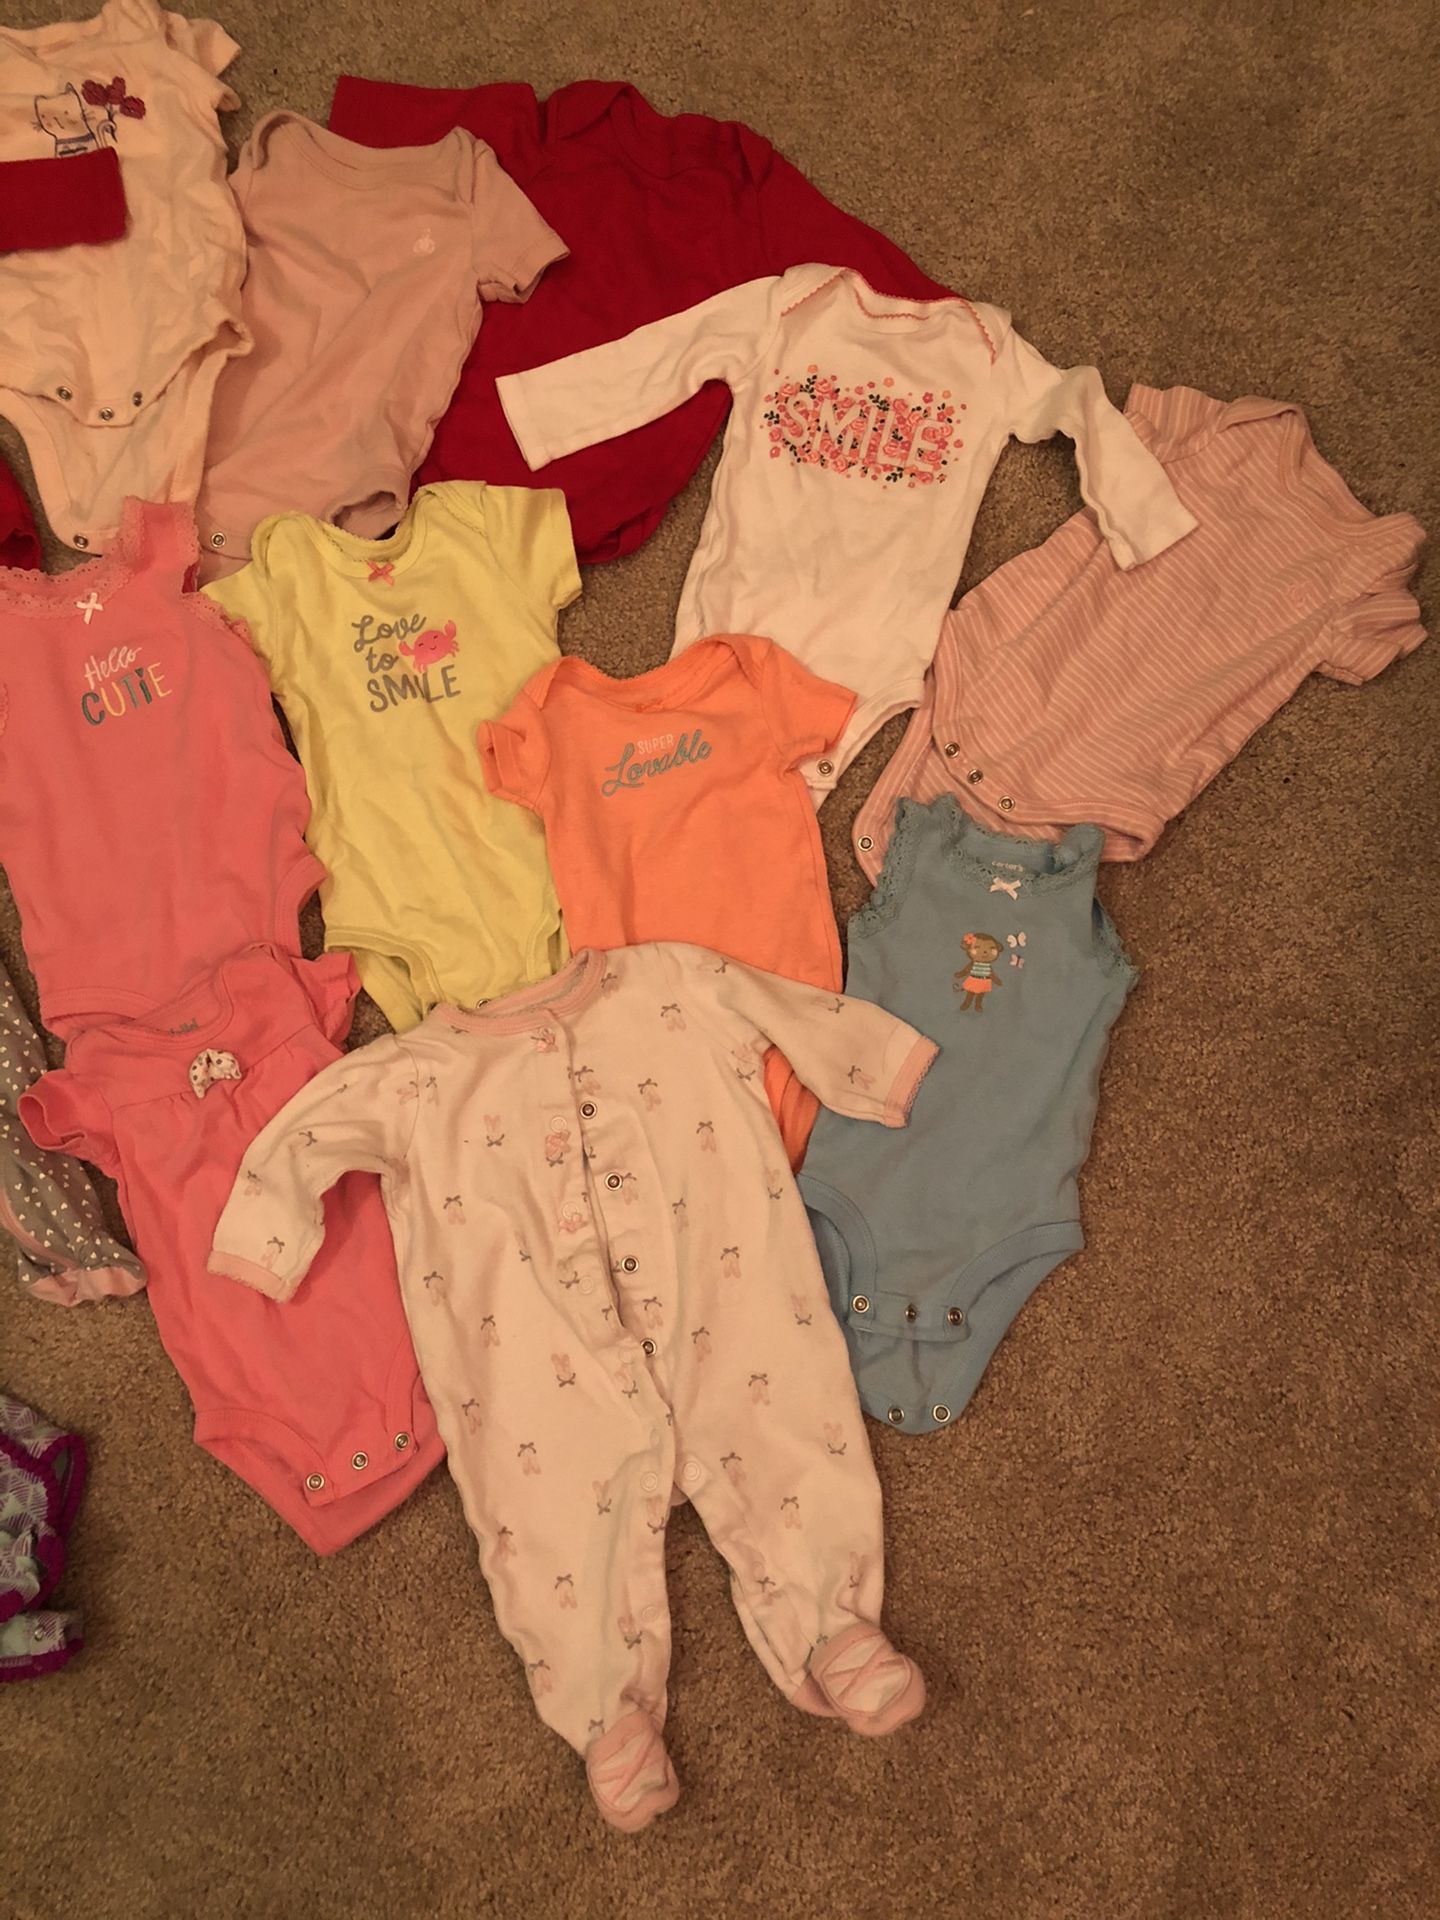 Huge baby girl lot clothes Calvin Klein , baby gap, Carter’s, Lacoste asking only 15$! Pants shorts onesies night dresses 0-6 months 9-18 lbs